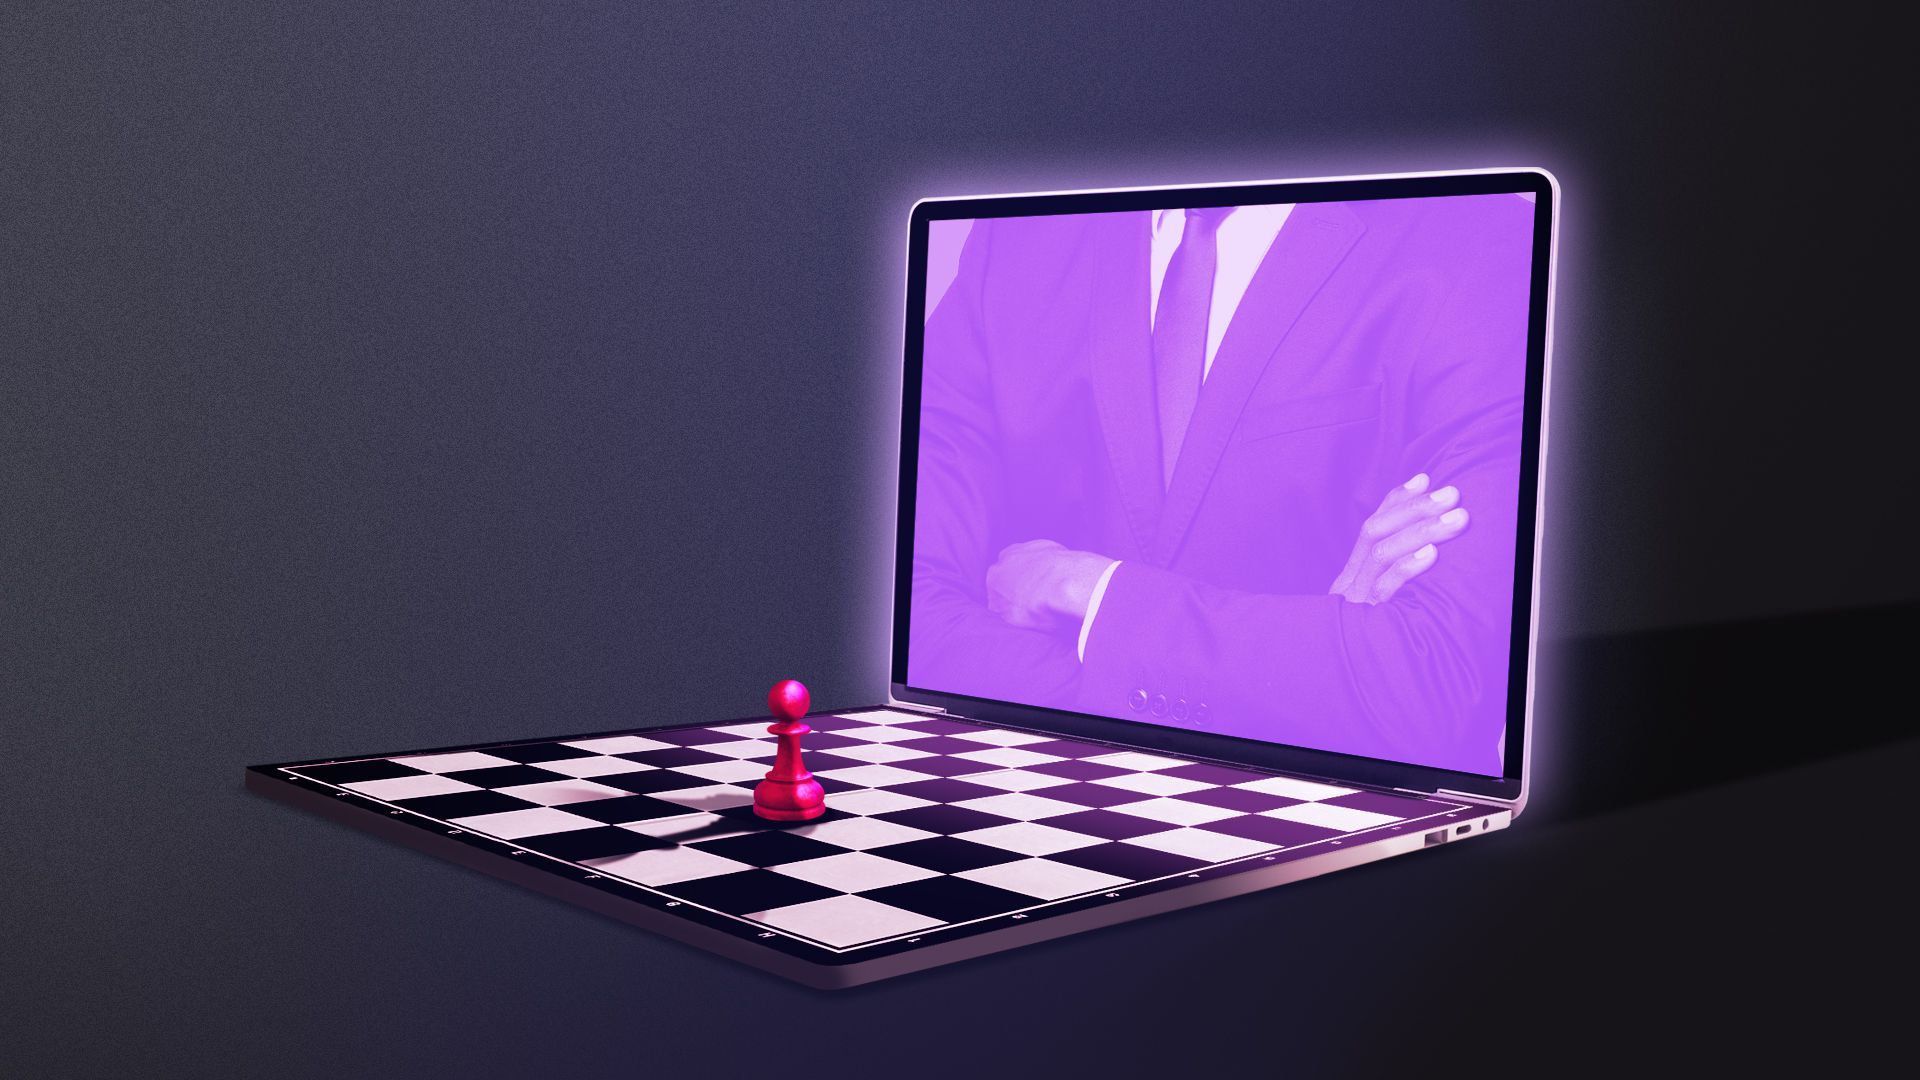 Illustration of a laptop featuring a chessboard keyboard with a single pawn on it and a man with arms crossed on the screen